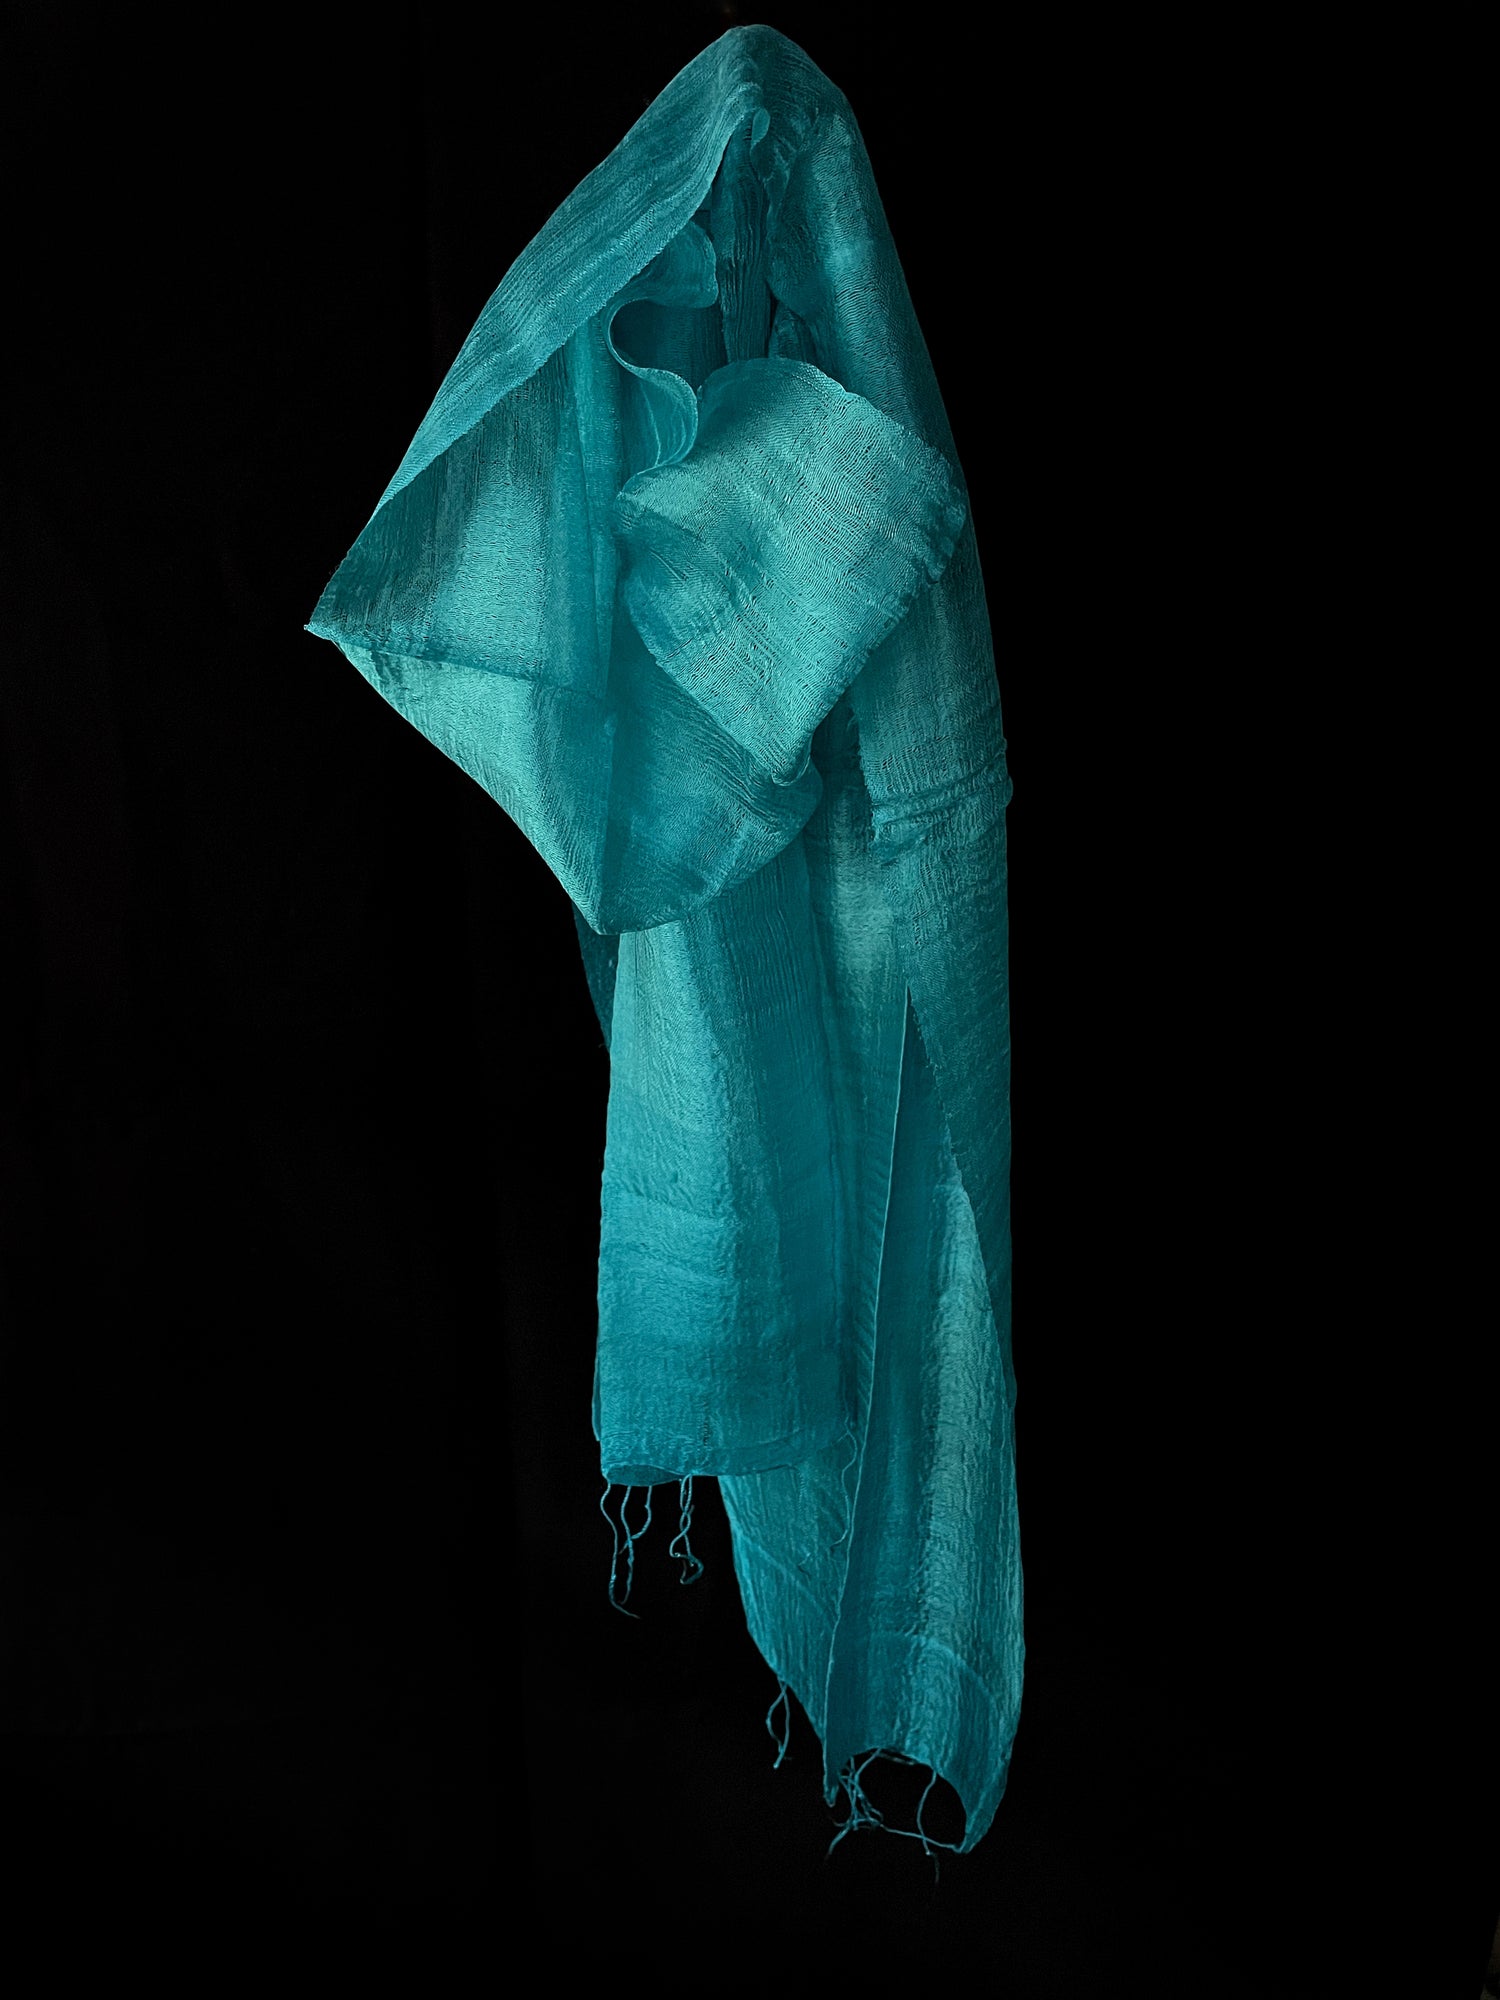 Thai silk scarf in rich turquoise blue shades, hand made and hand dyed.